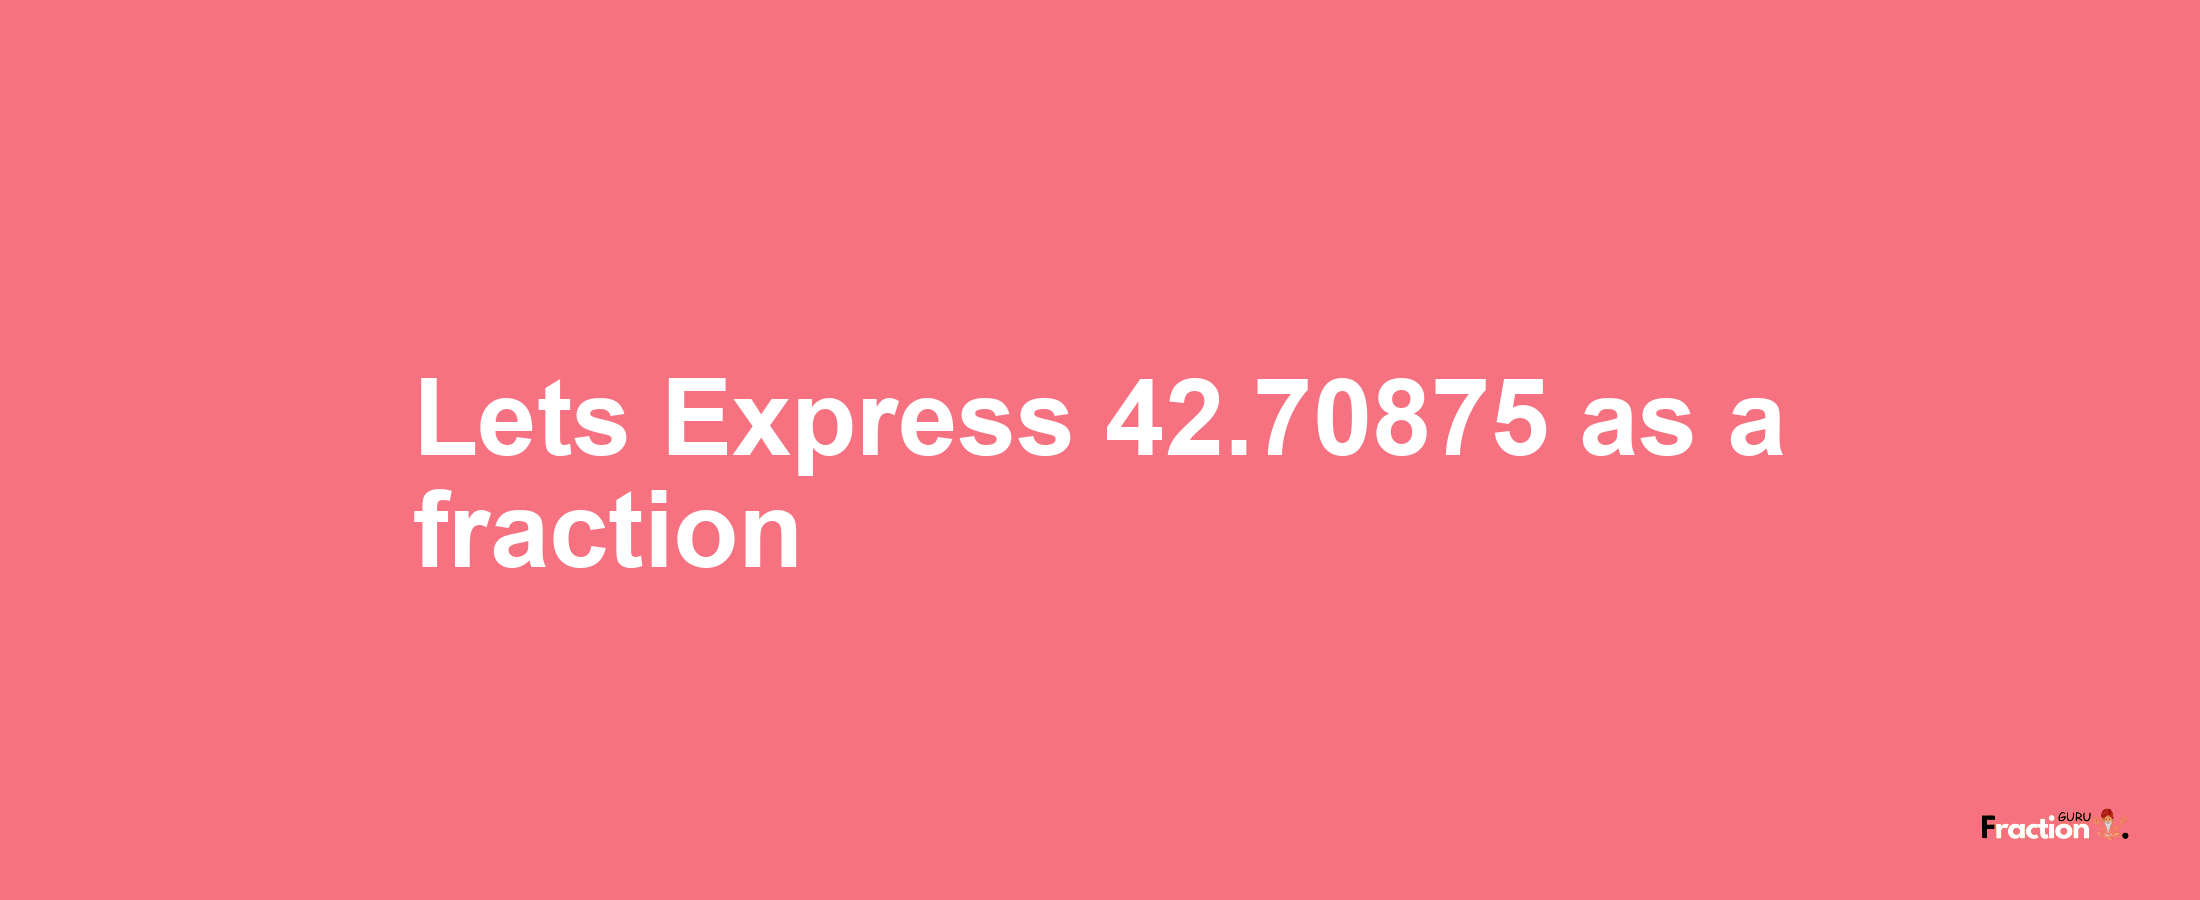 Lets Express 42.70875 as afraction